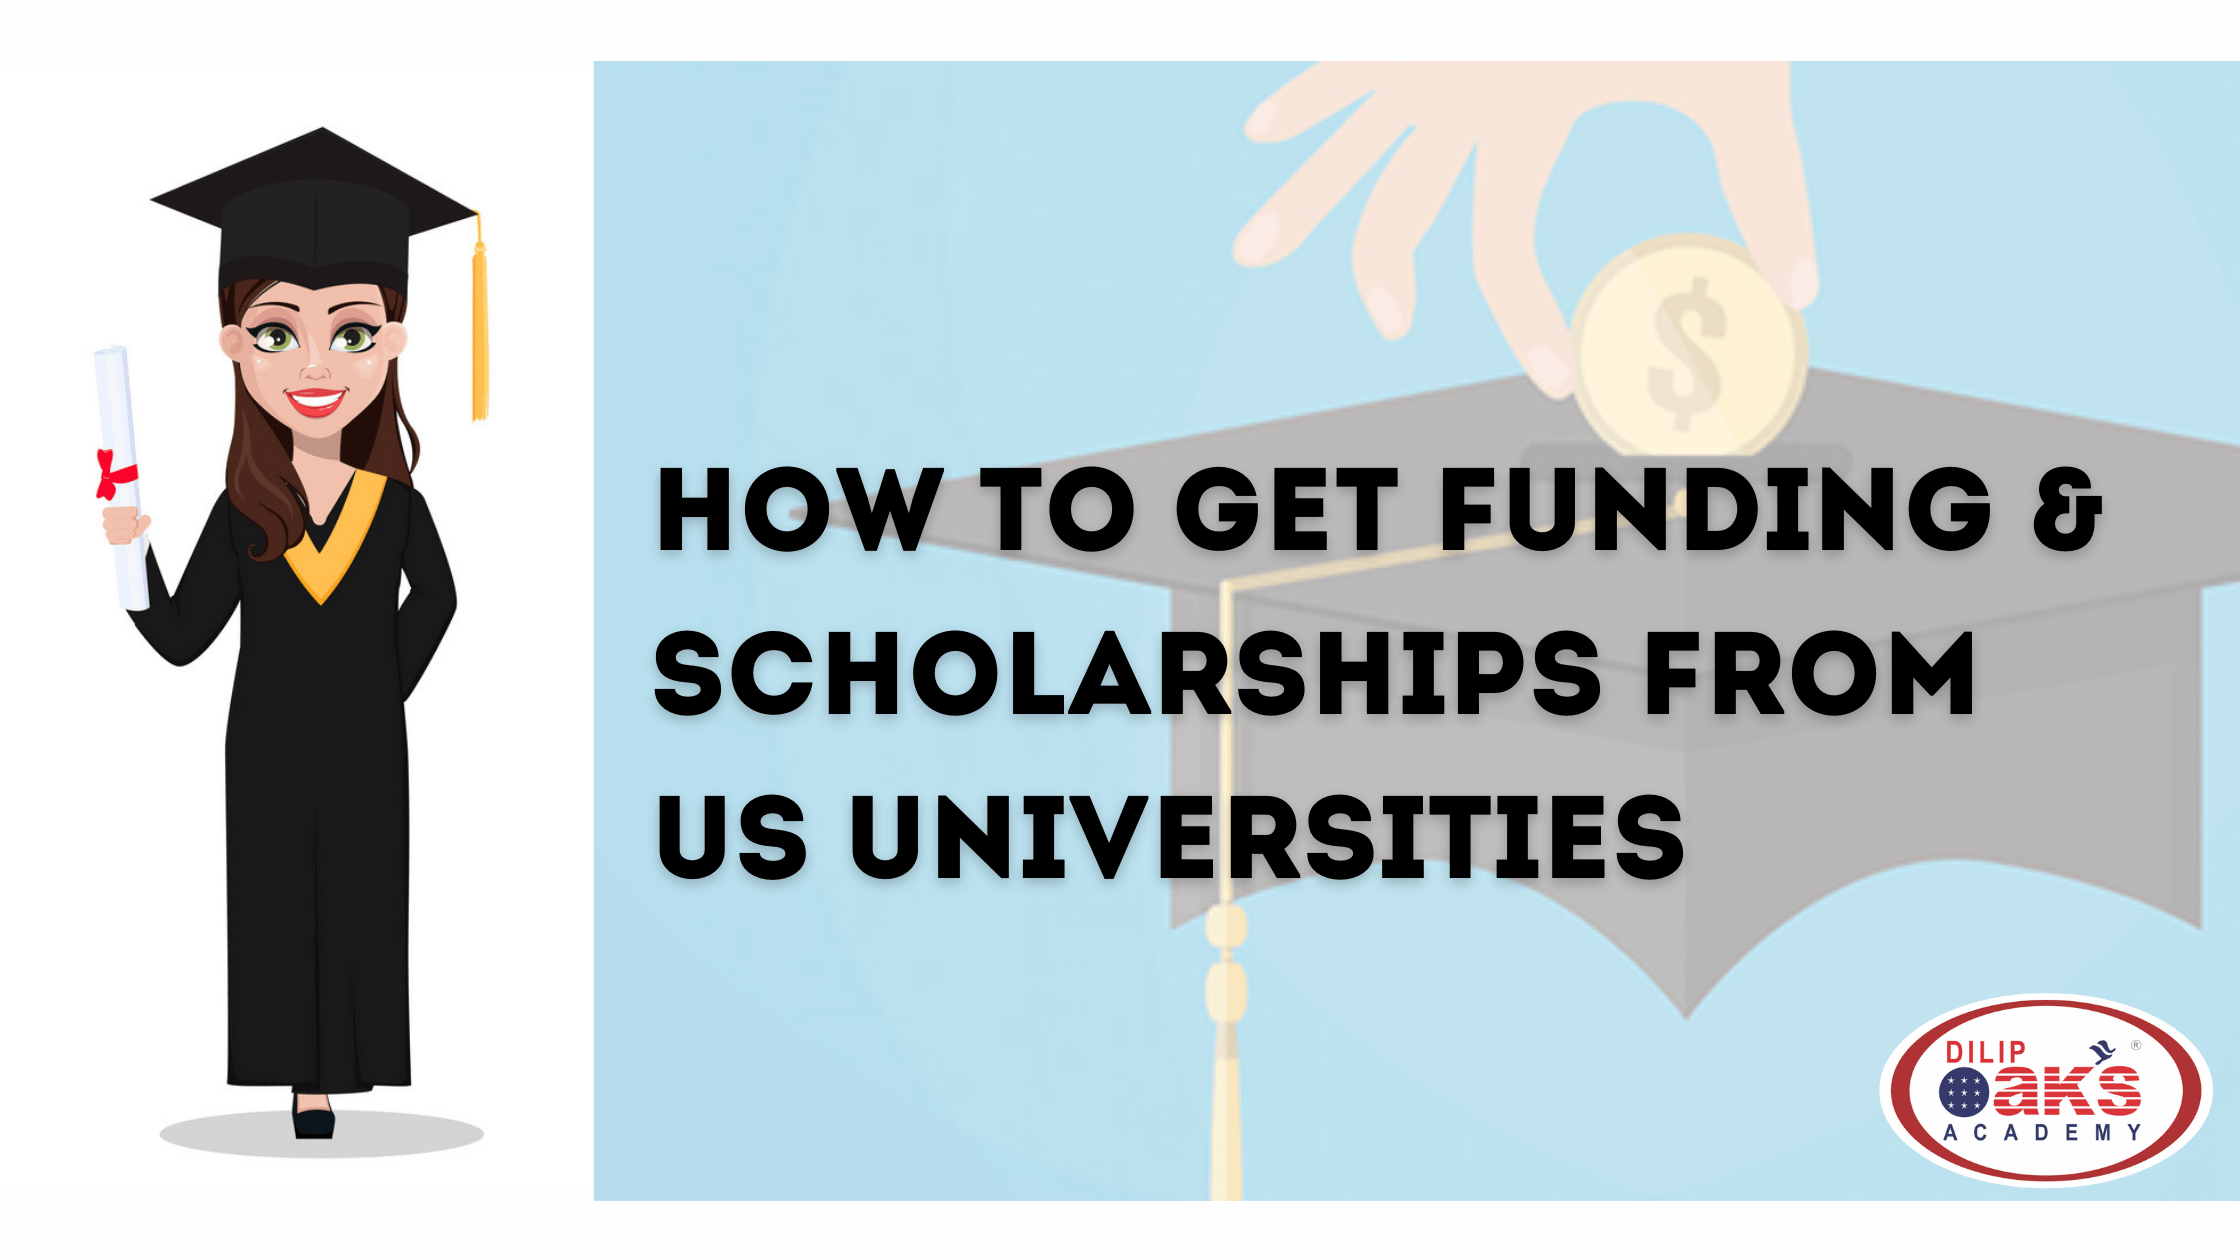 How to get funding & scholarships from US universities